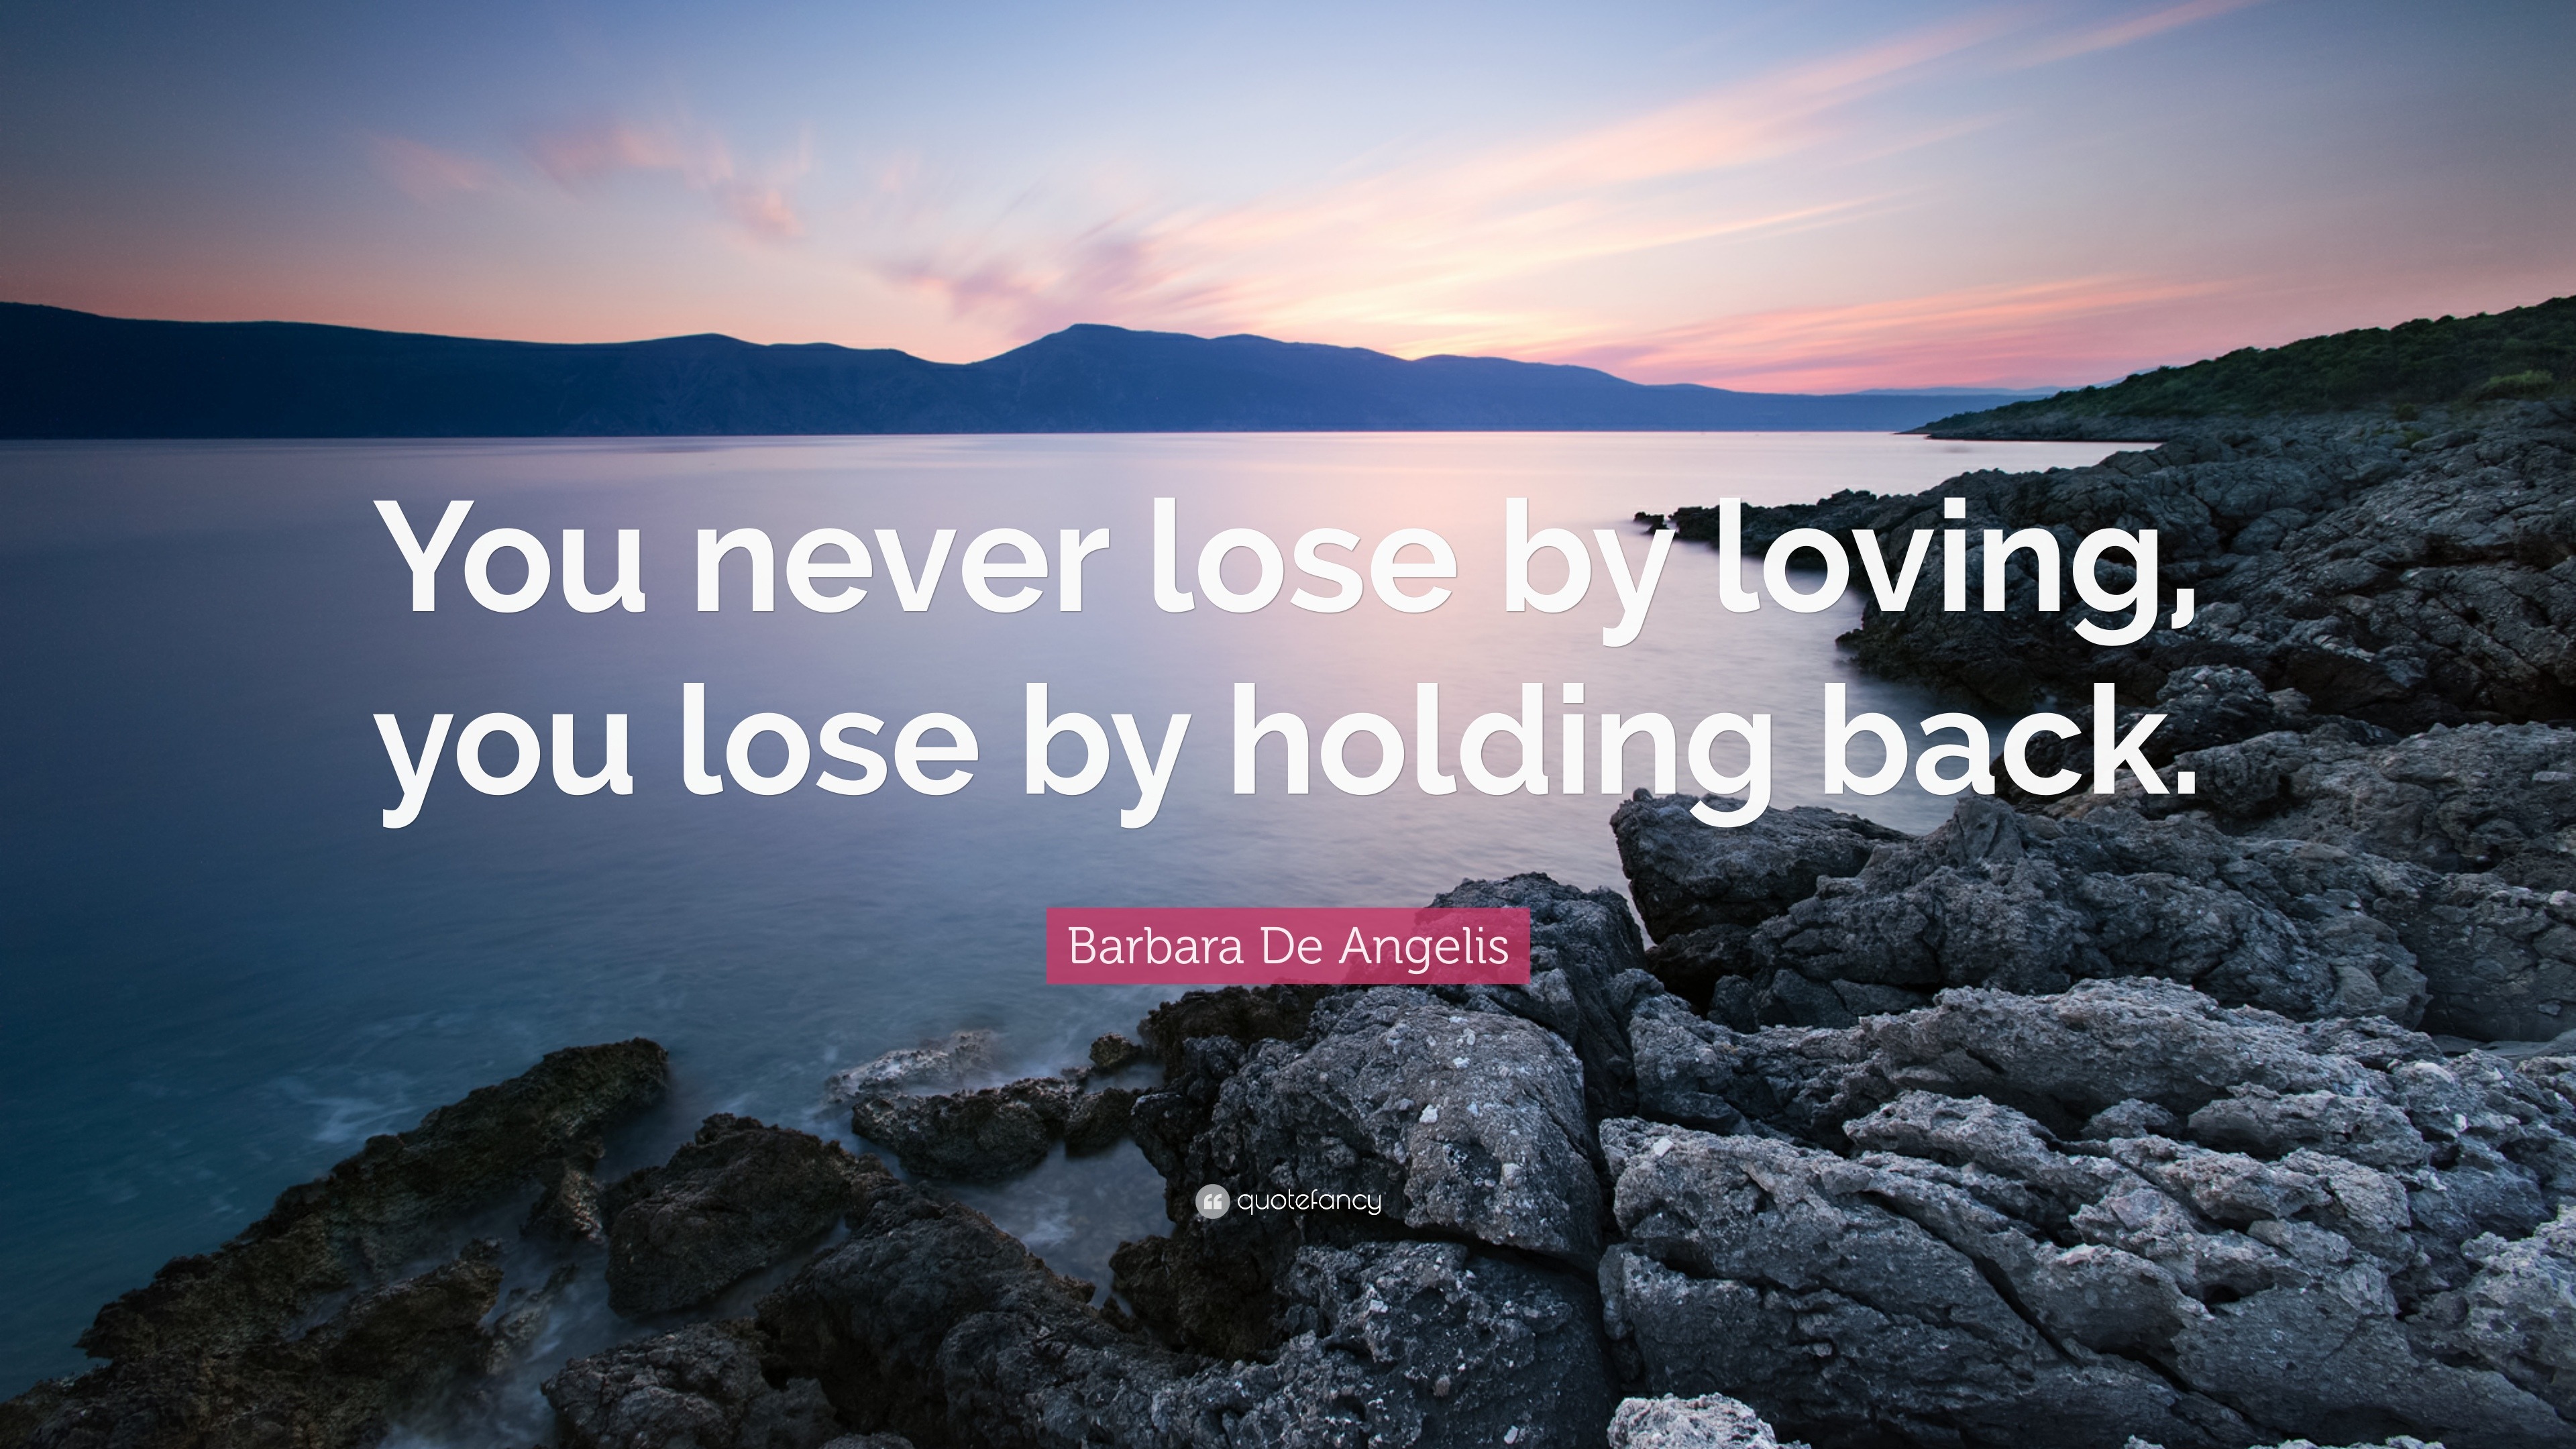 Barbara De Angelis Quote “You never lose by loving you lose by holding